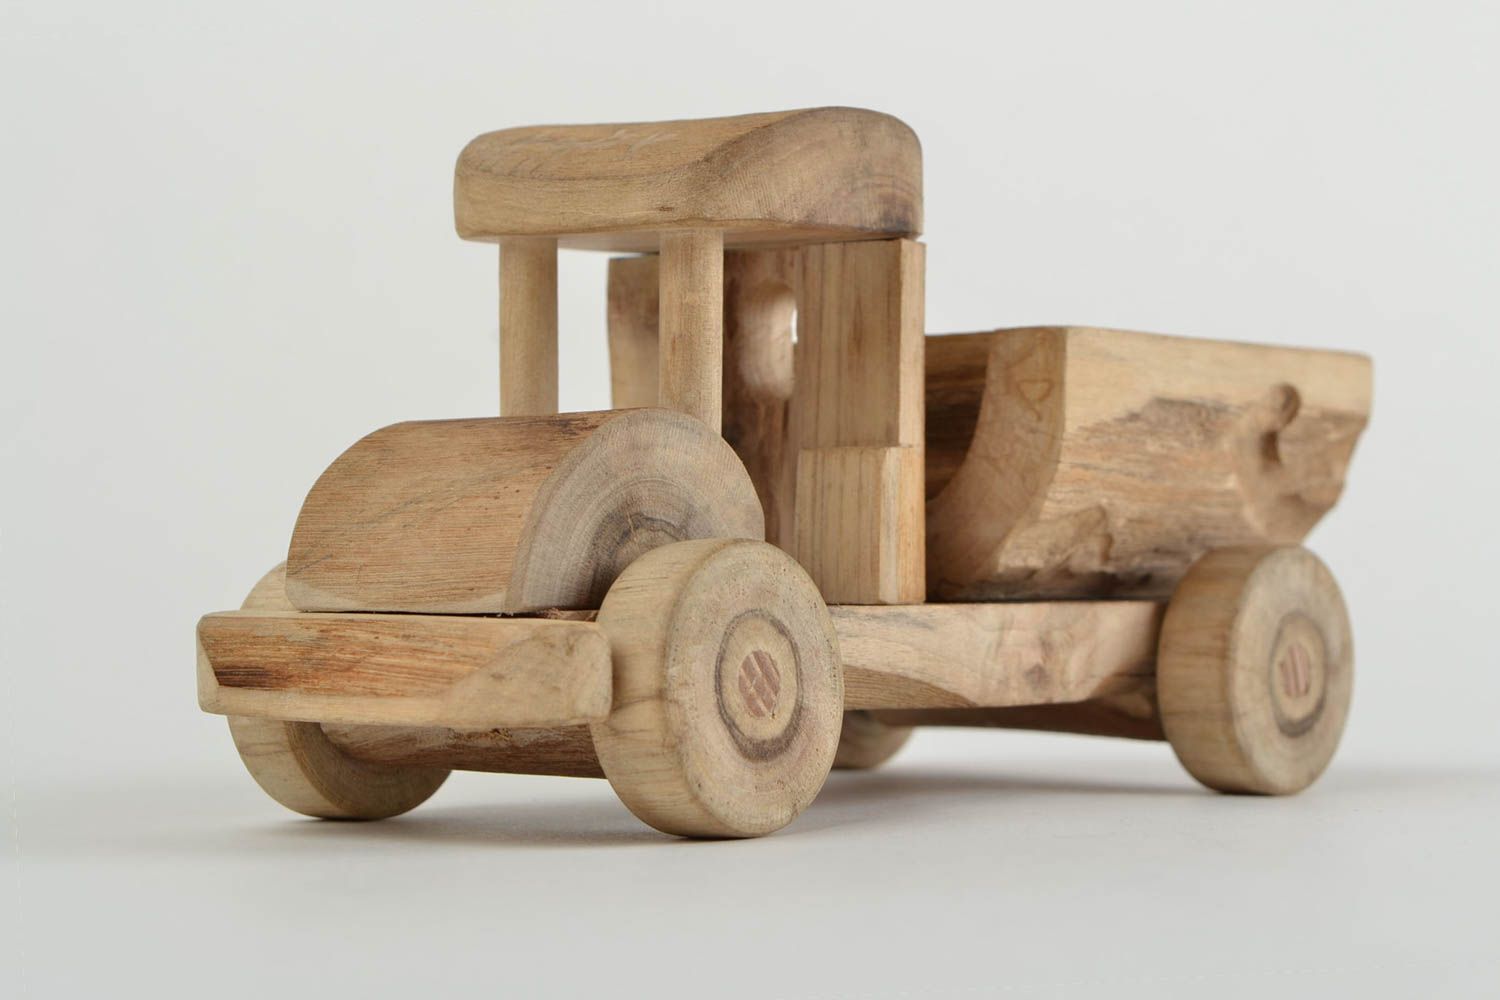 Eco-Friendly Wooden Toy Gift Ideas - The Antiqued Journey